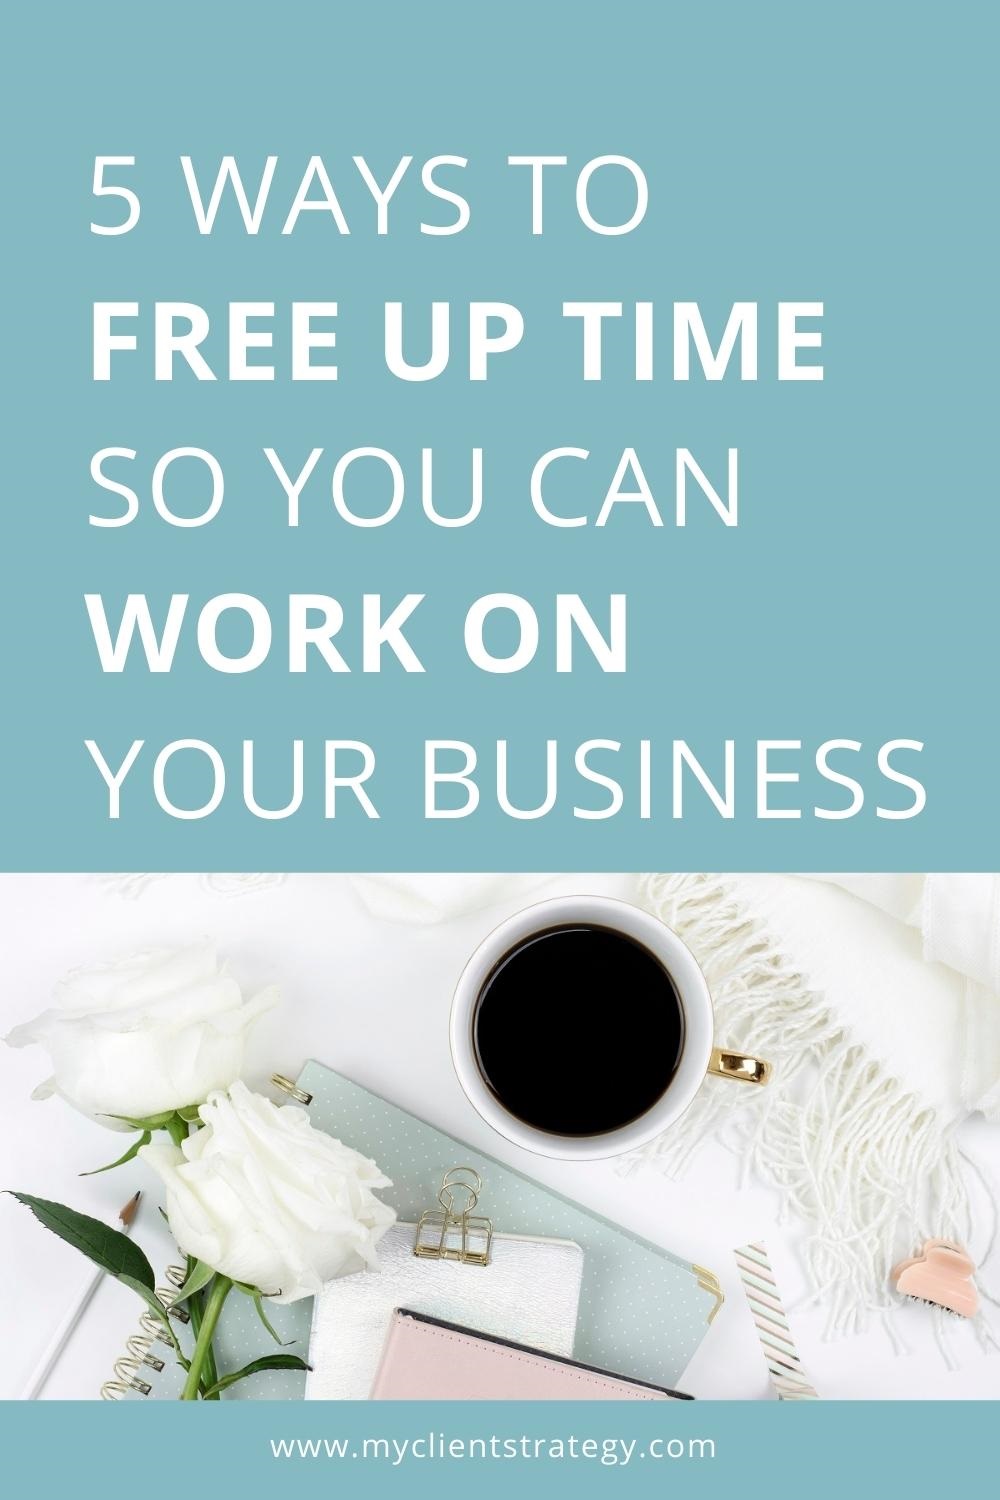 5 ways to free up time so you can work on your business